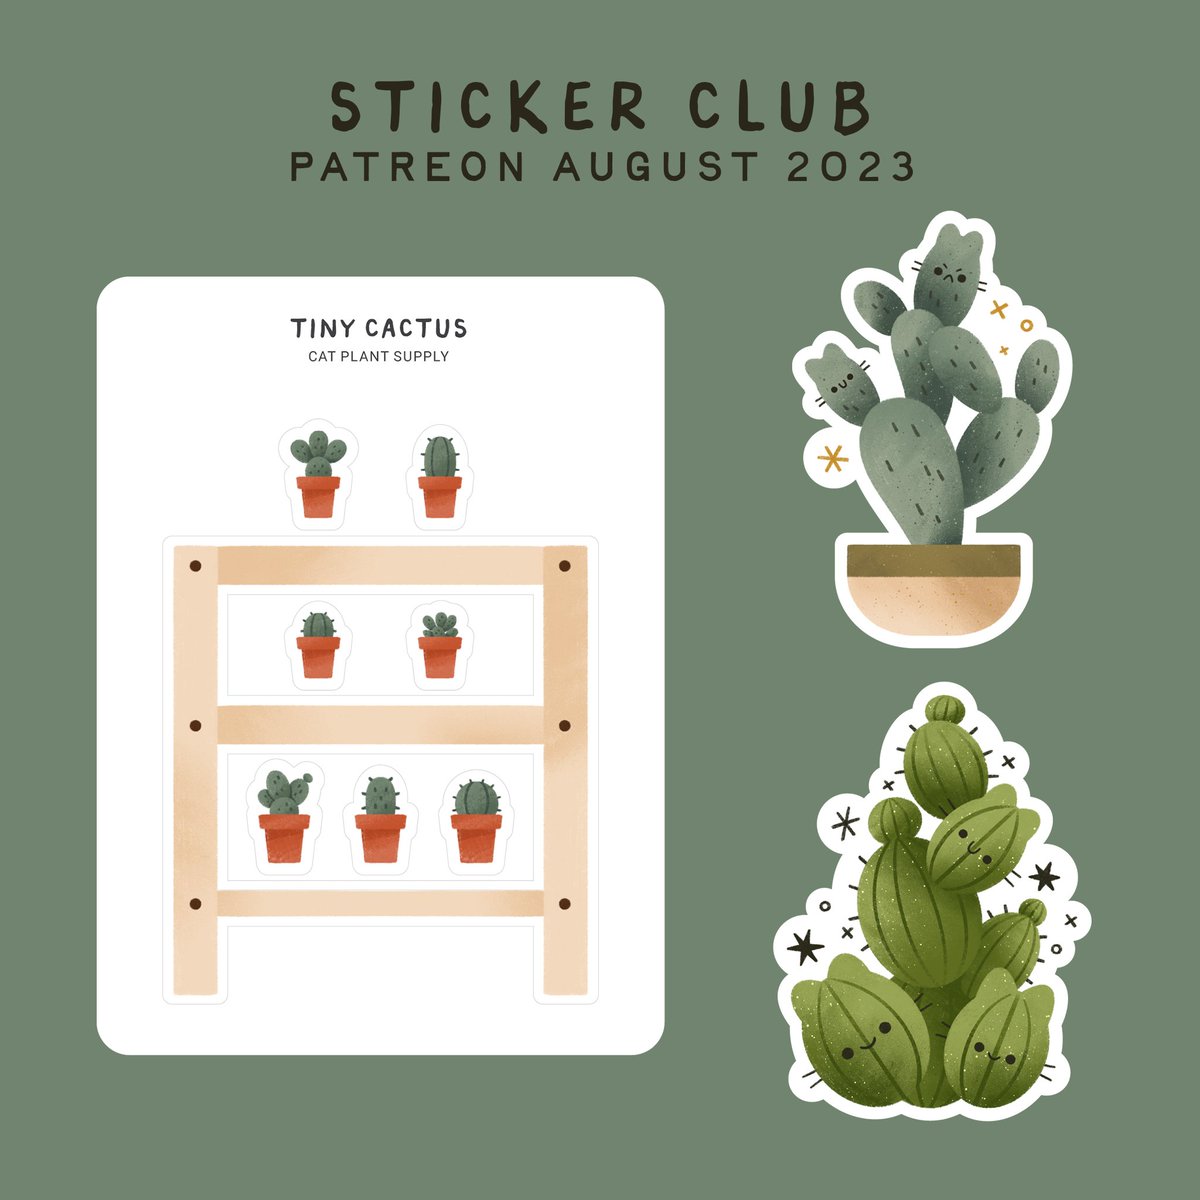 Happy August! The sticker club theme this month is cacti. patreon.com/catplantsupply